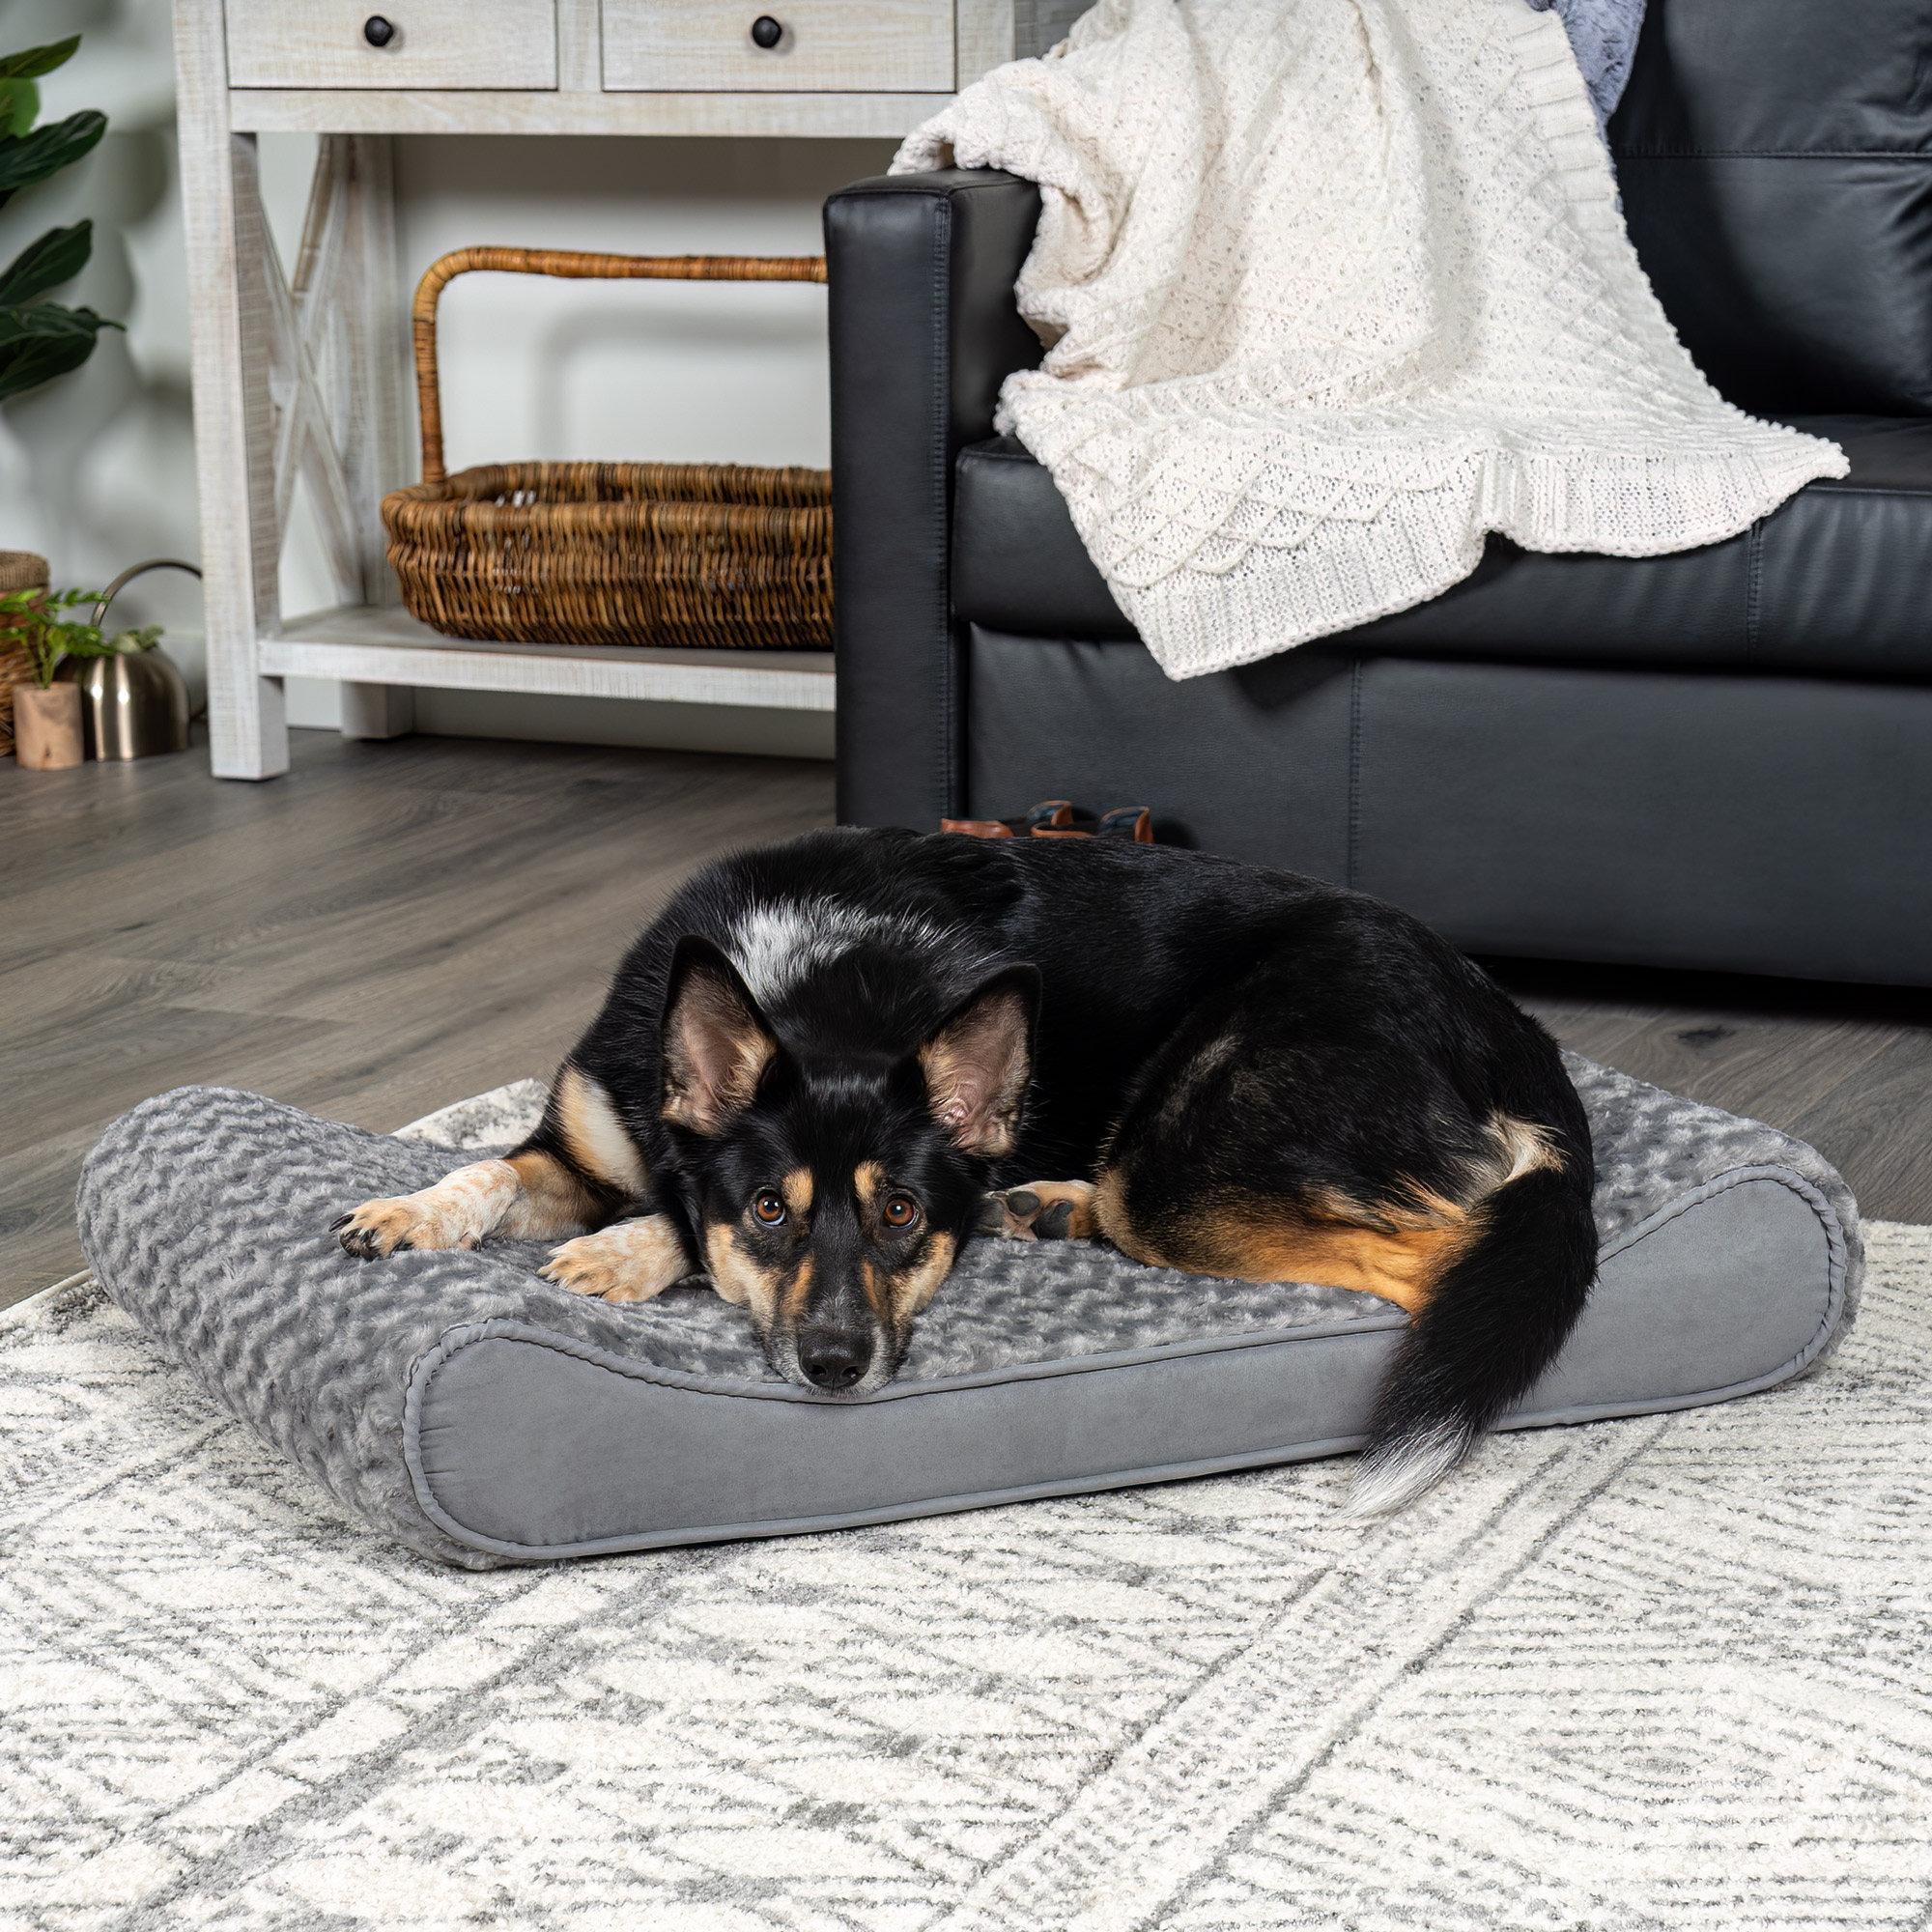 Orthopedic Dog Beds & Products for Therapeutic Sleeping